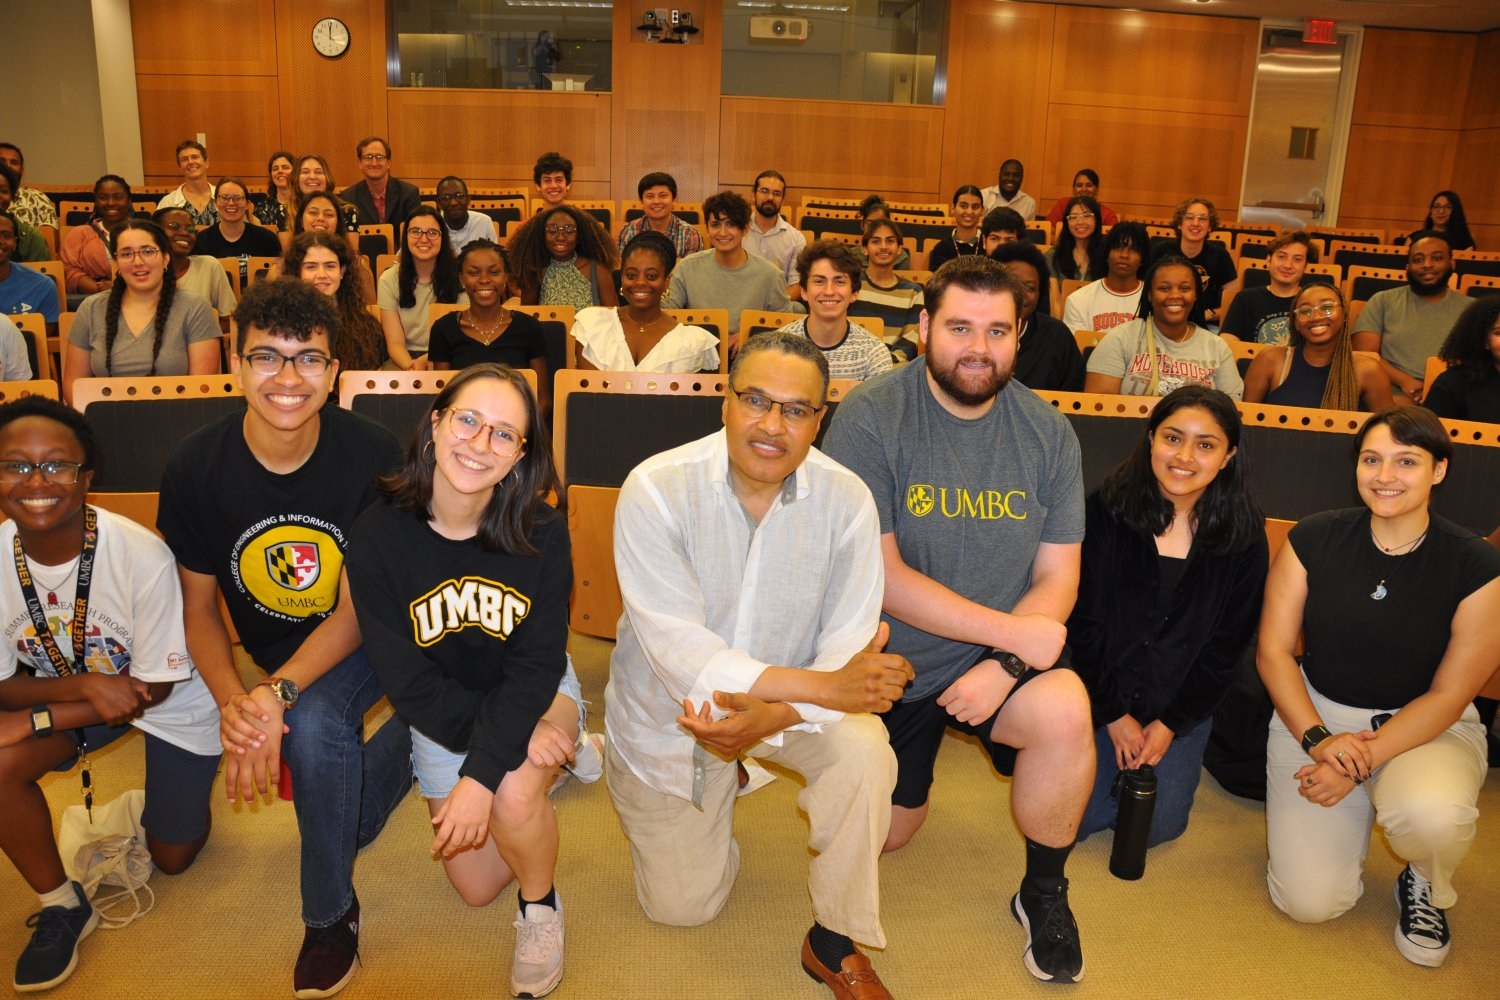 Freeman Hrabowski encourages students to “hold fast to dreams” and take time for laughter